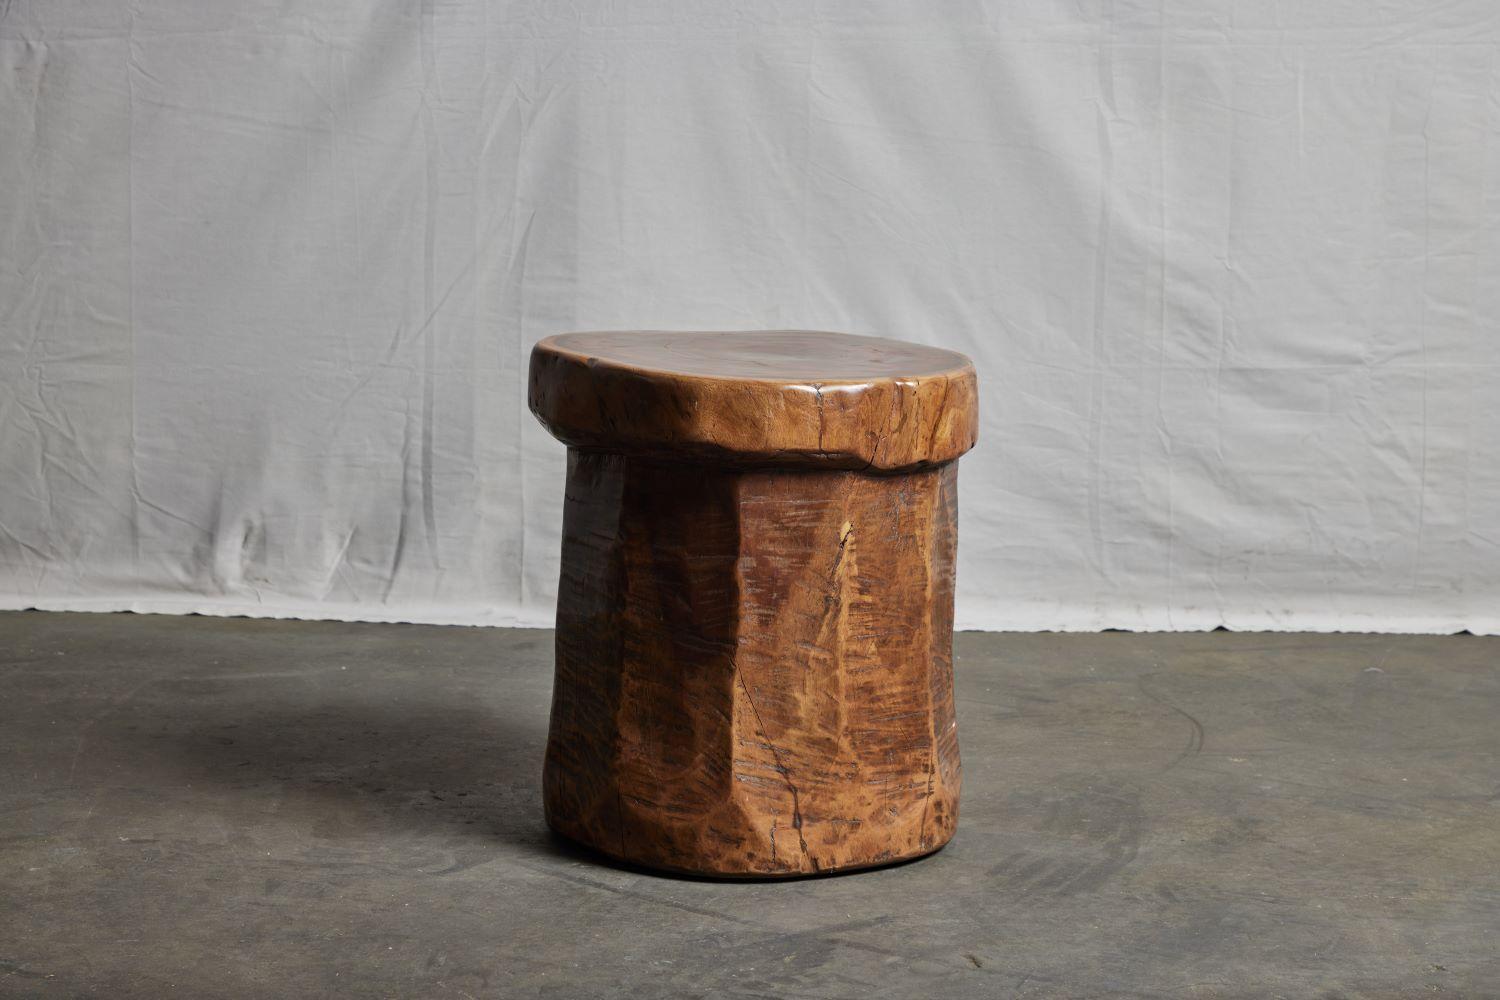 Granary Mortar Indonesian teak stool, 20th century. Can be used alone as a stool or side table, are functionally as a low table base.